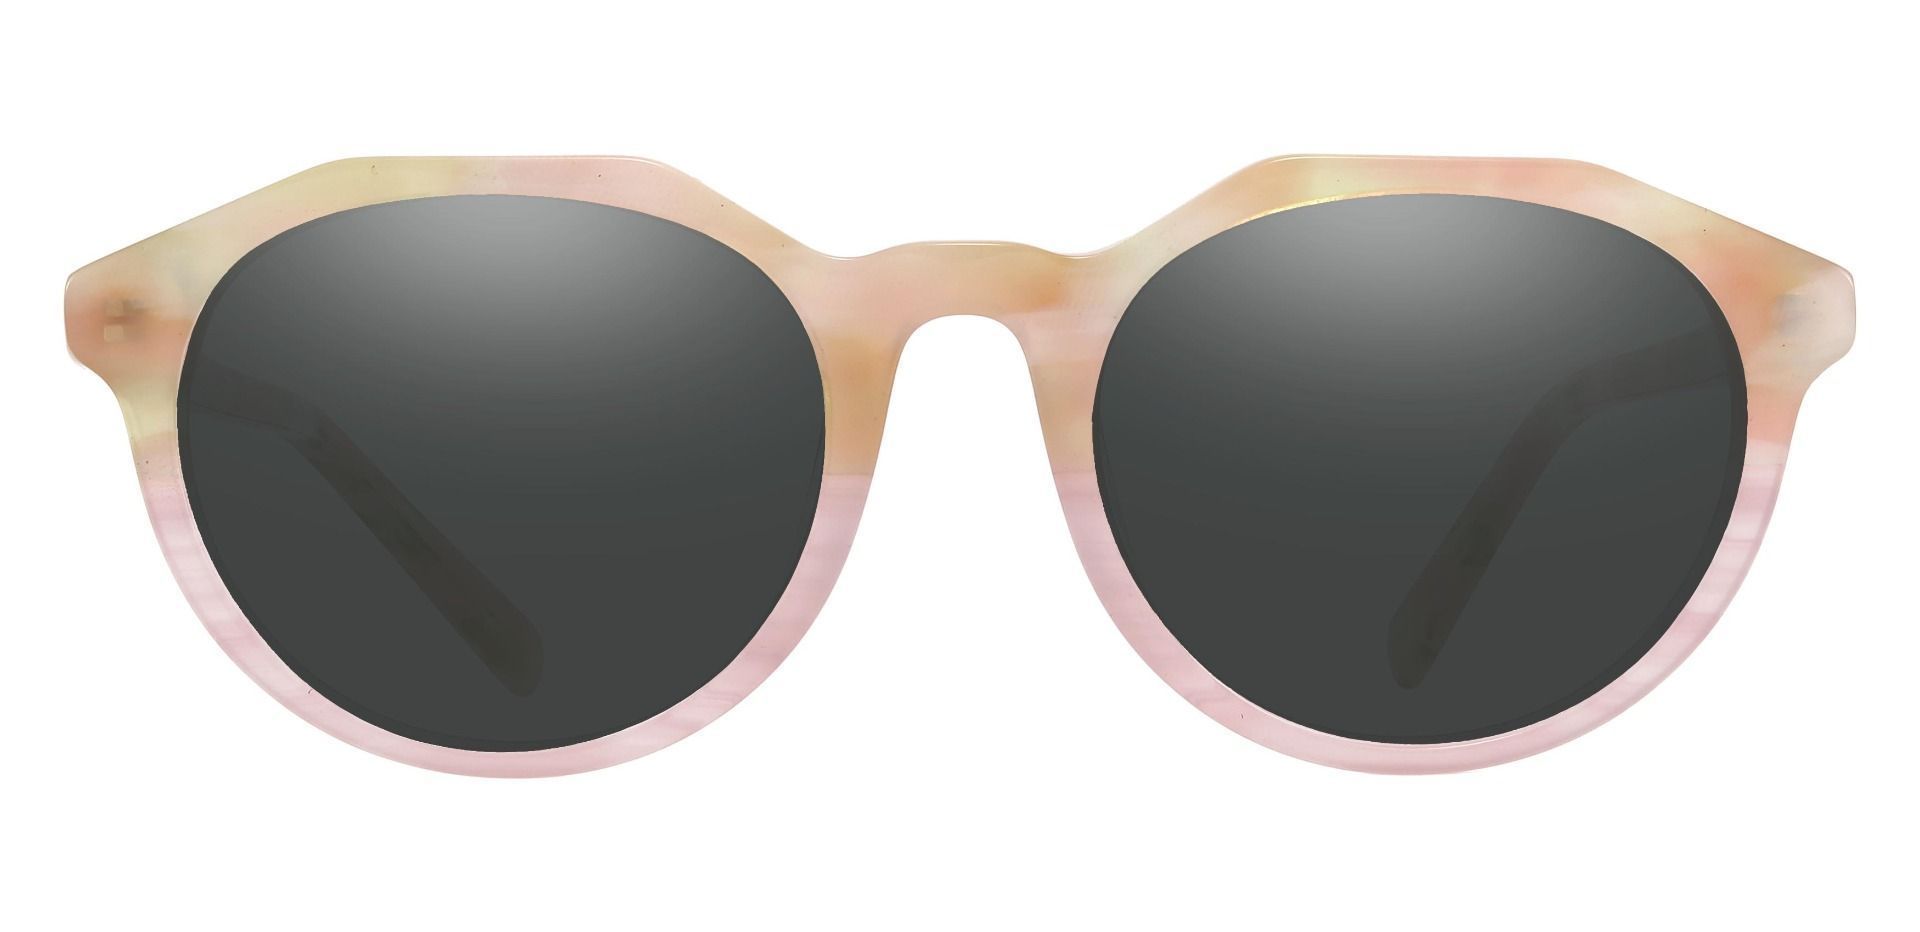 Mayfield Oval Progressive Sunglasses - Pink Frame With Gray Lenses